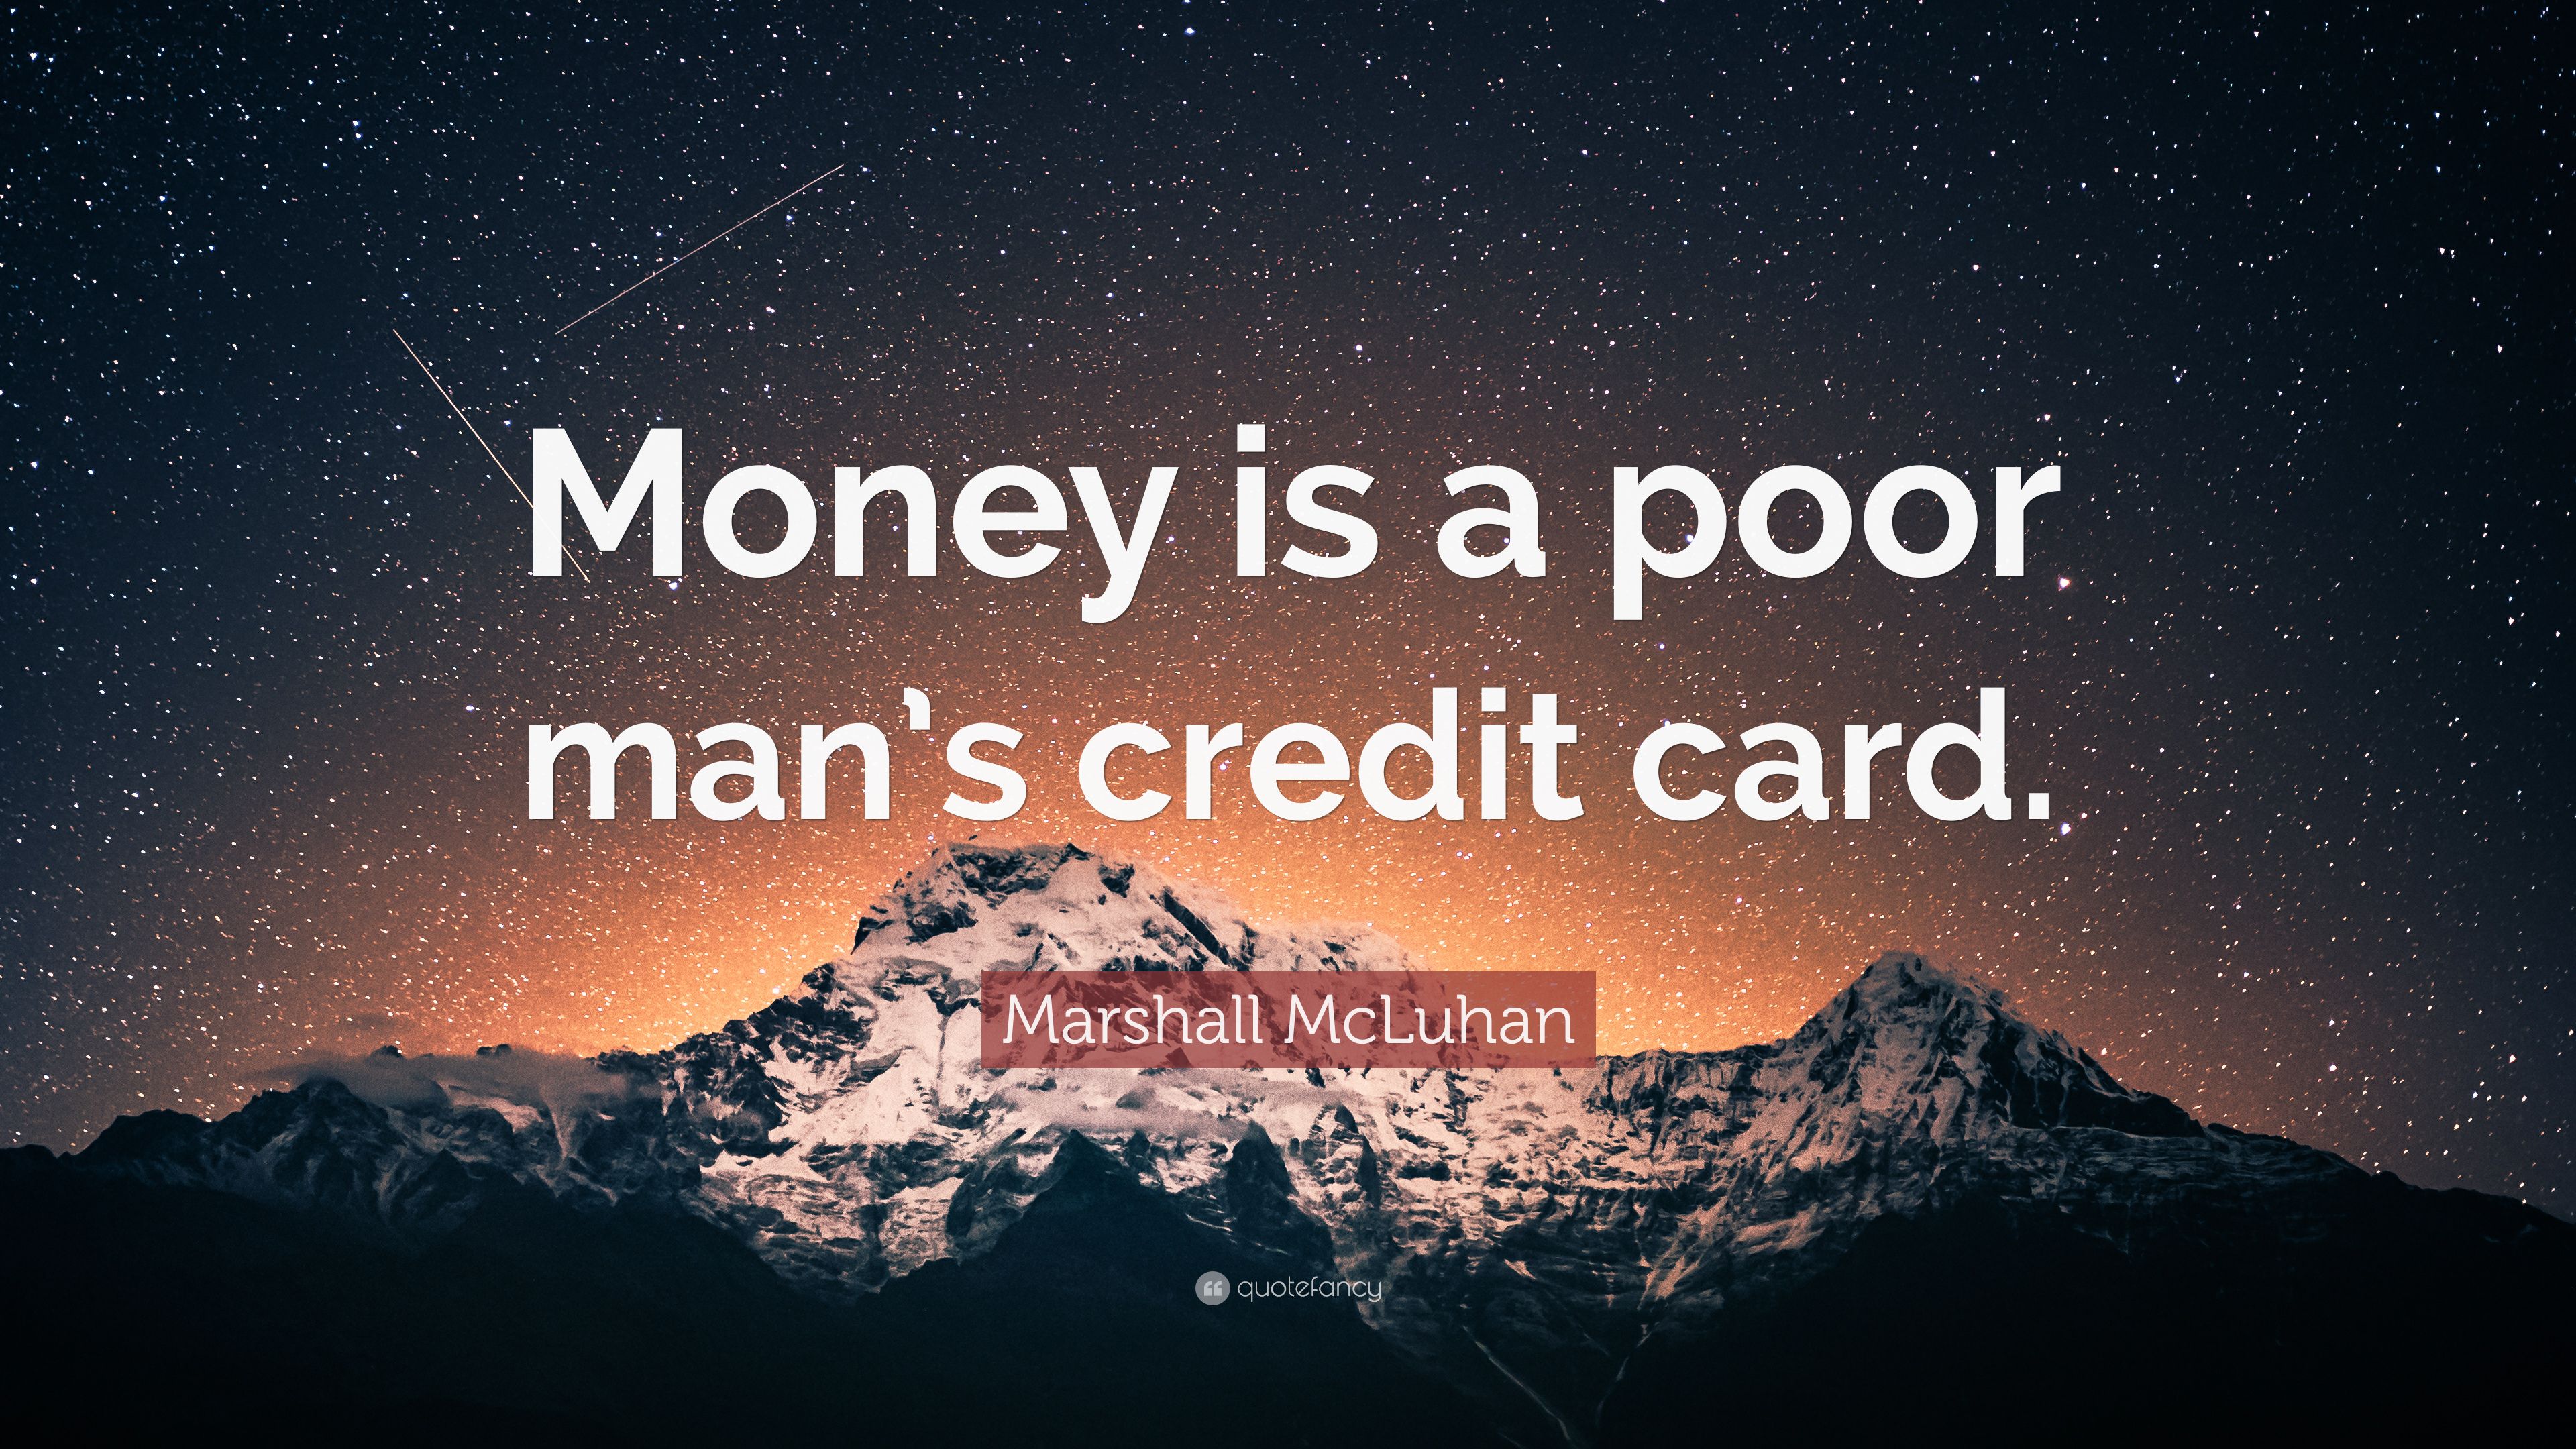 Marshall McLuhan Quote: “Money is a poor man's credit card.” 9